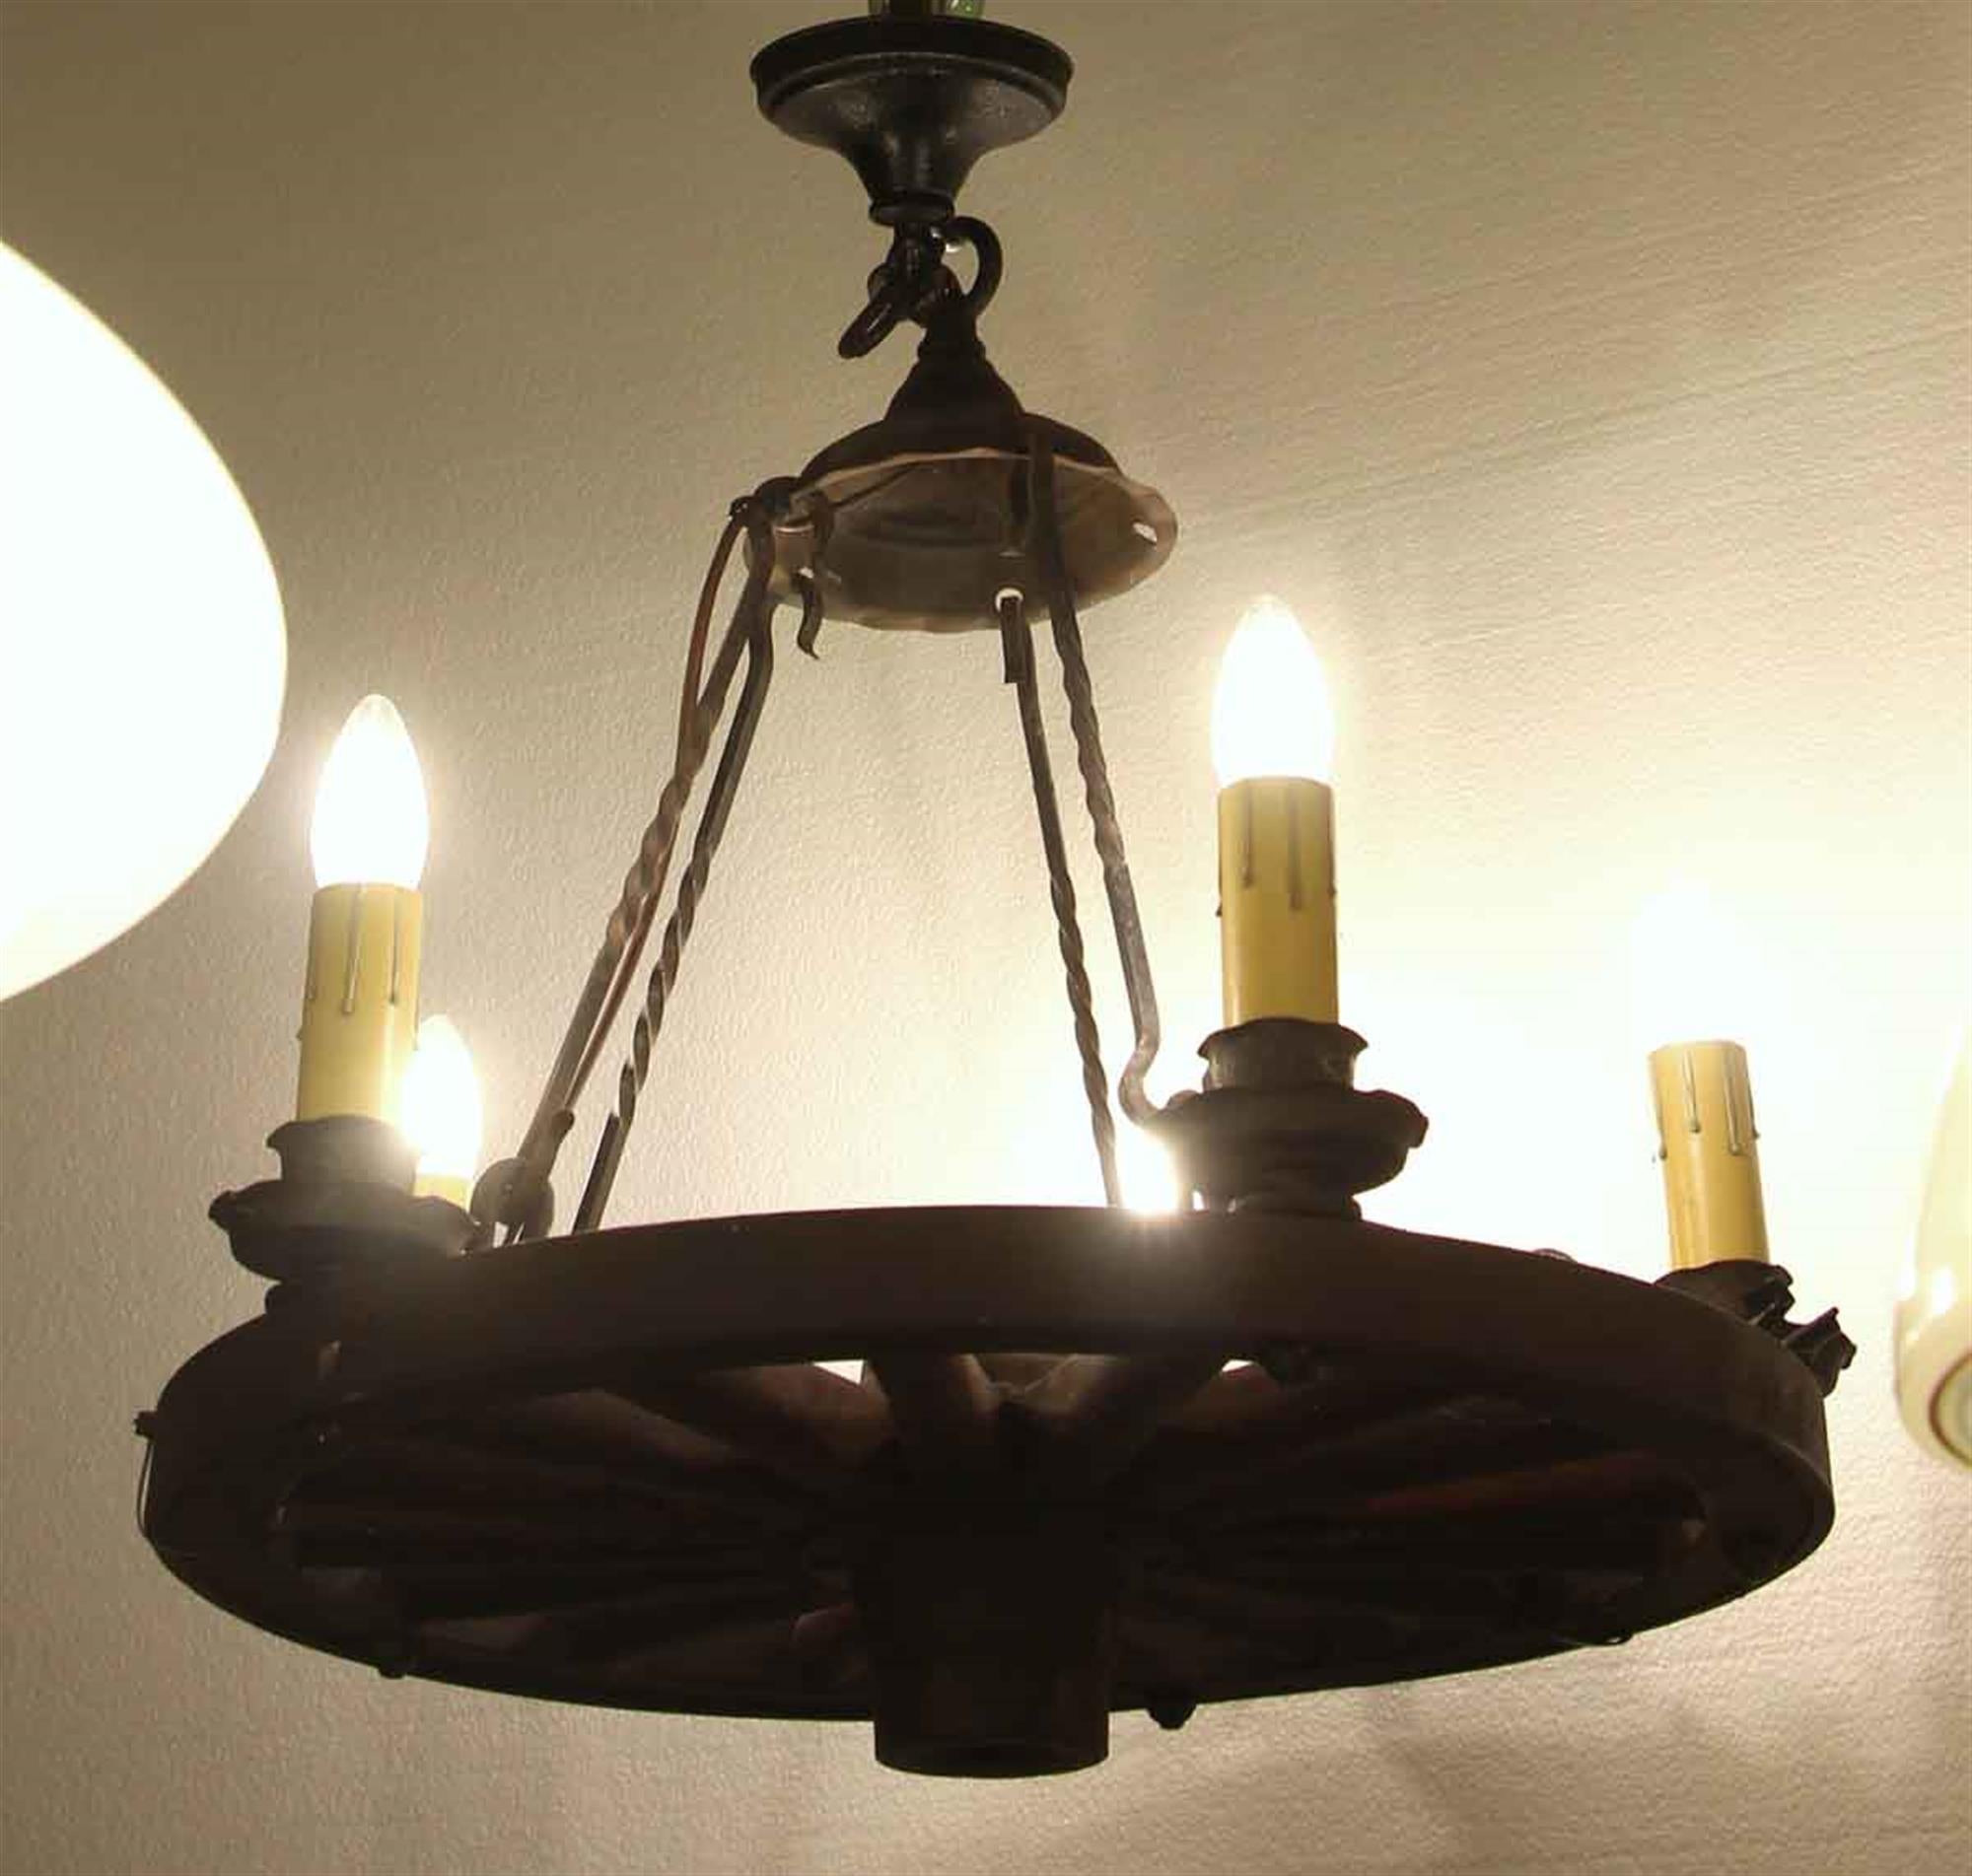 Wooden wagon wheel chandelier with wrought iron fitter and 5 candlestick arms. Small quantity available at time of posting. Please inquire. Priced each. This can be seen at our 2420 Broadway location on the upper west side in Manhattan.